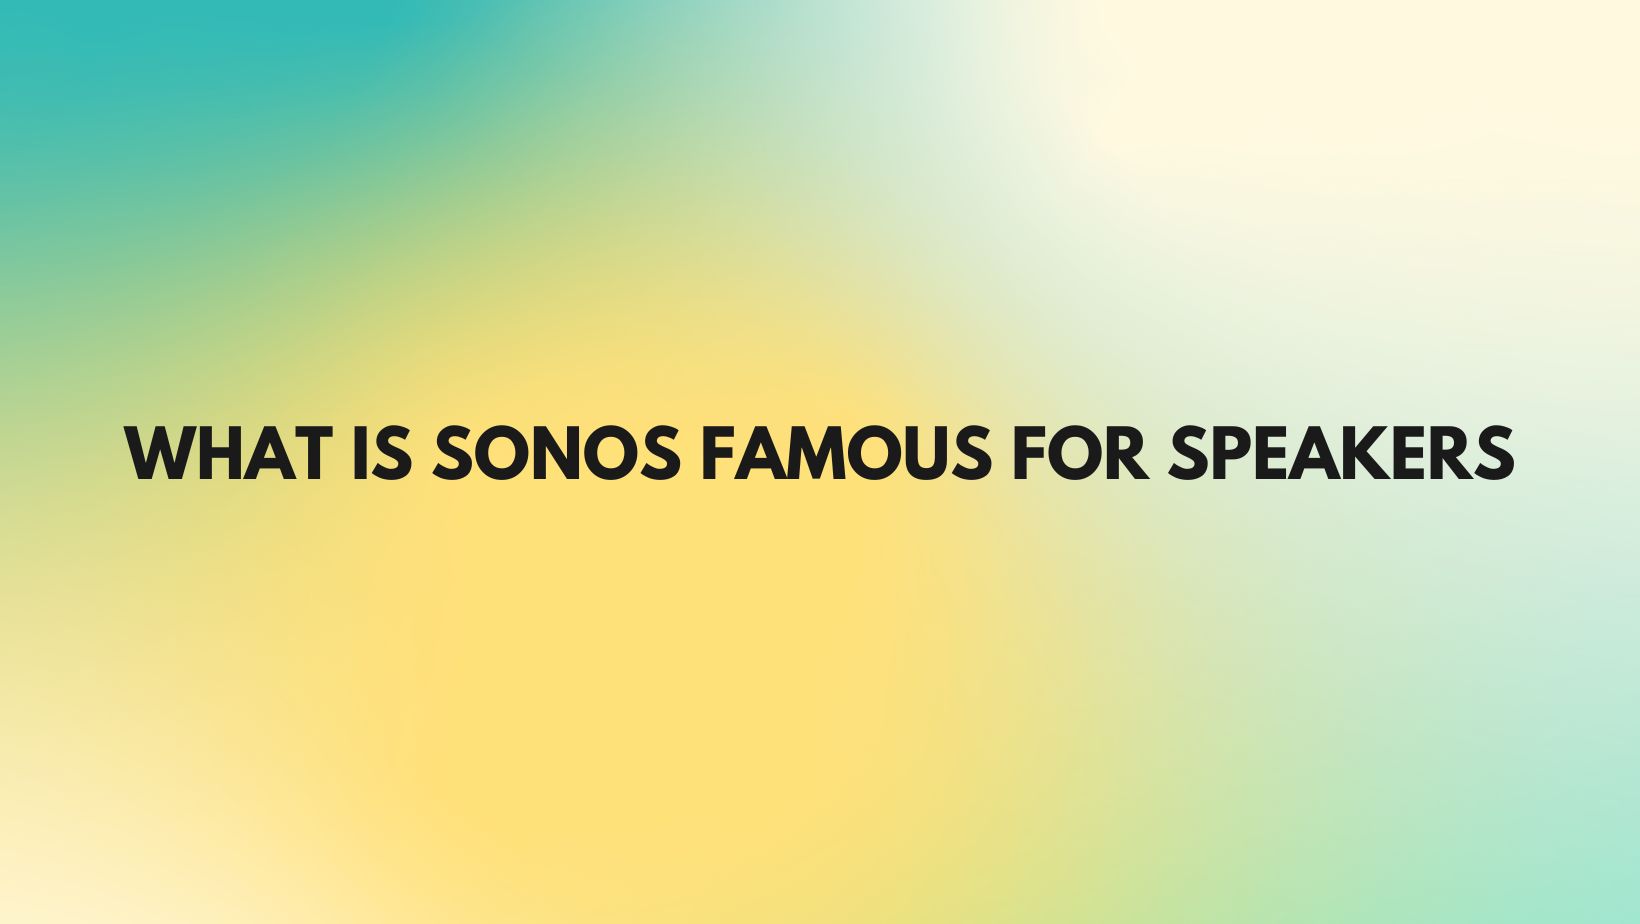 What is sonos famous for speakers